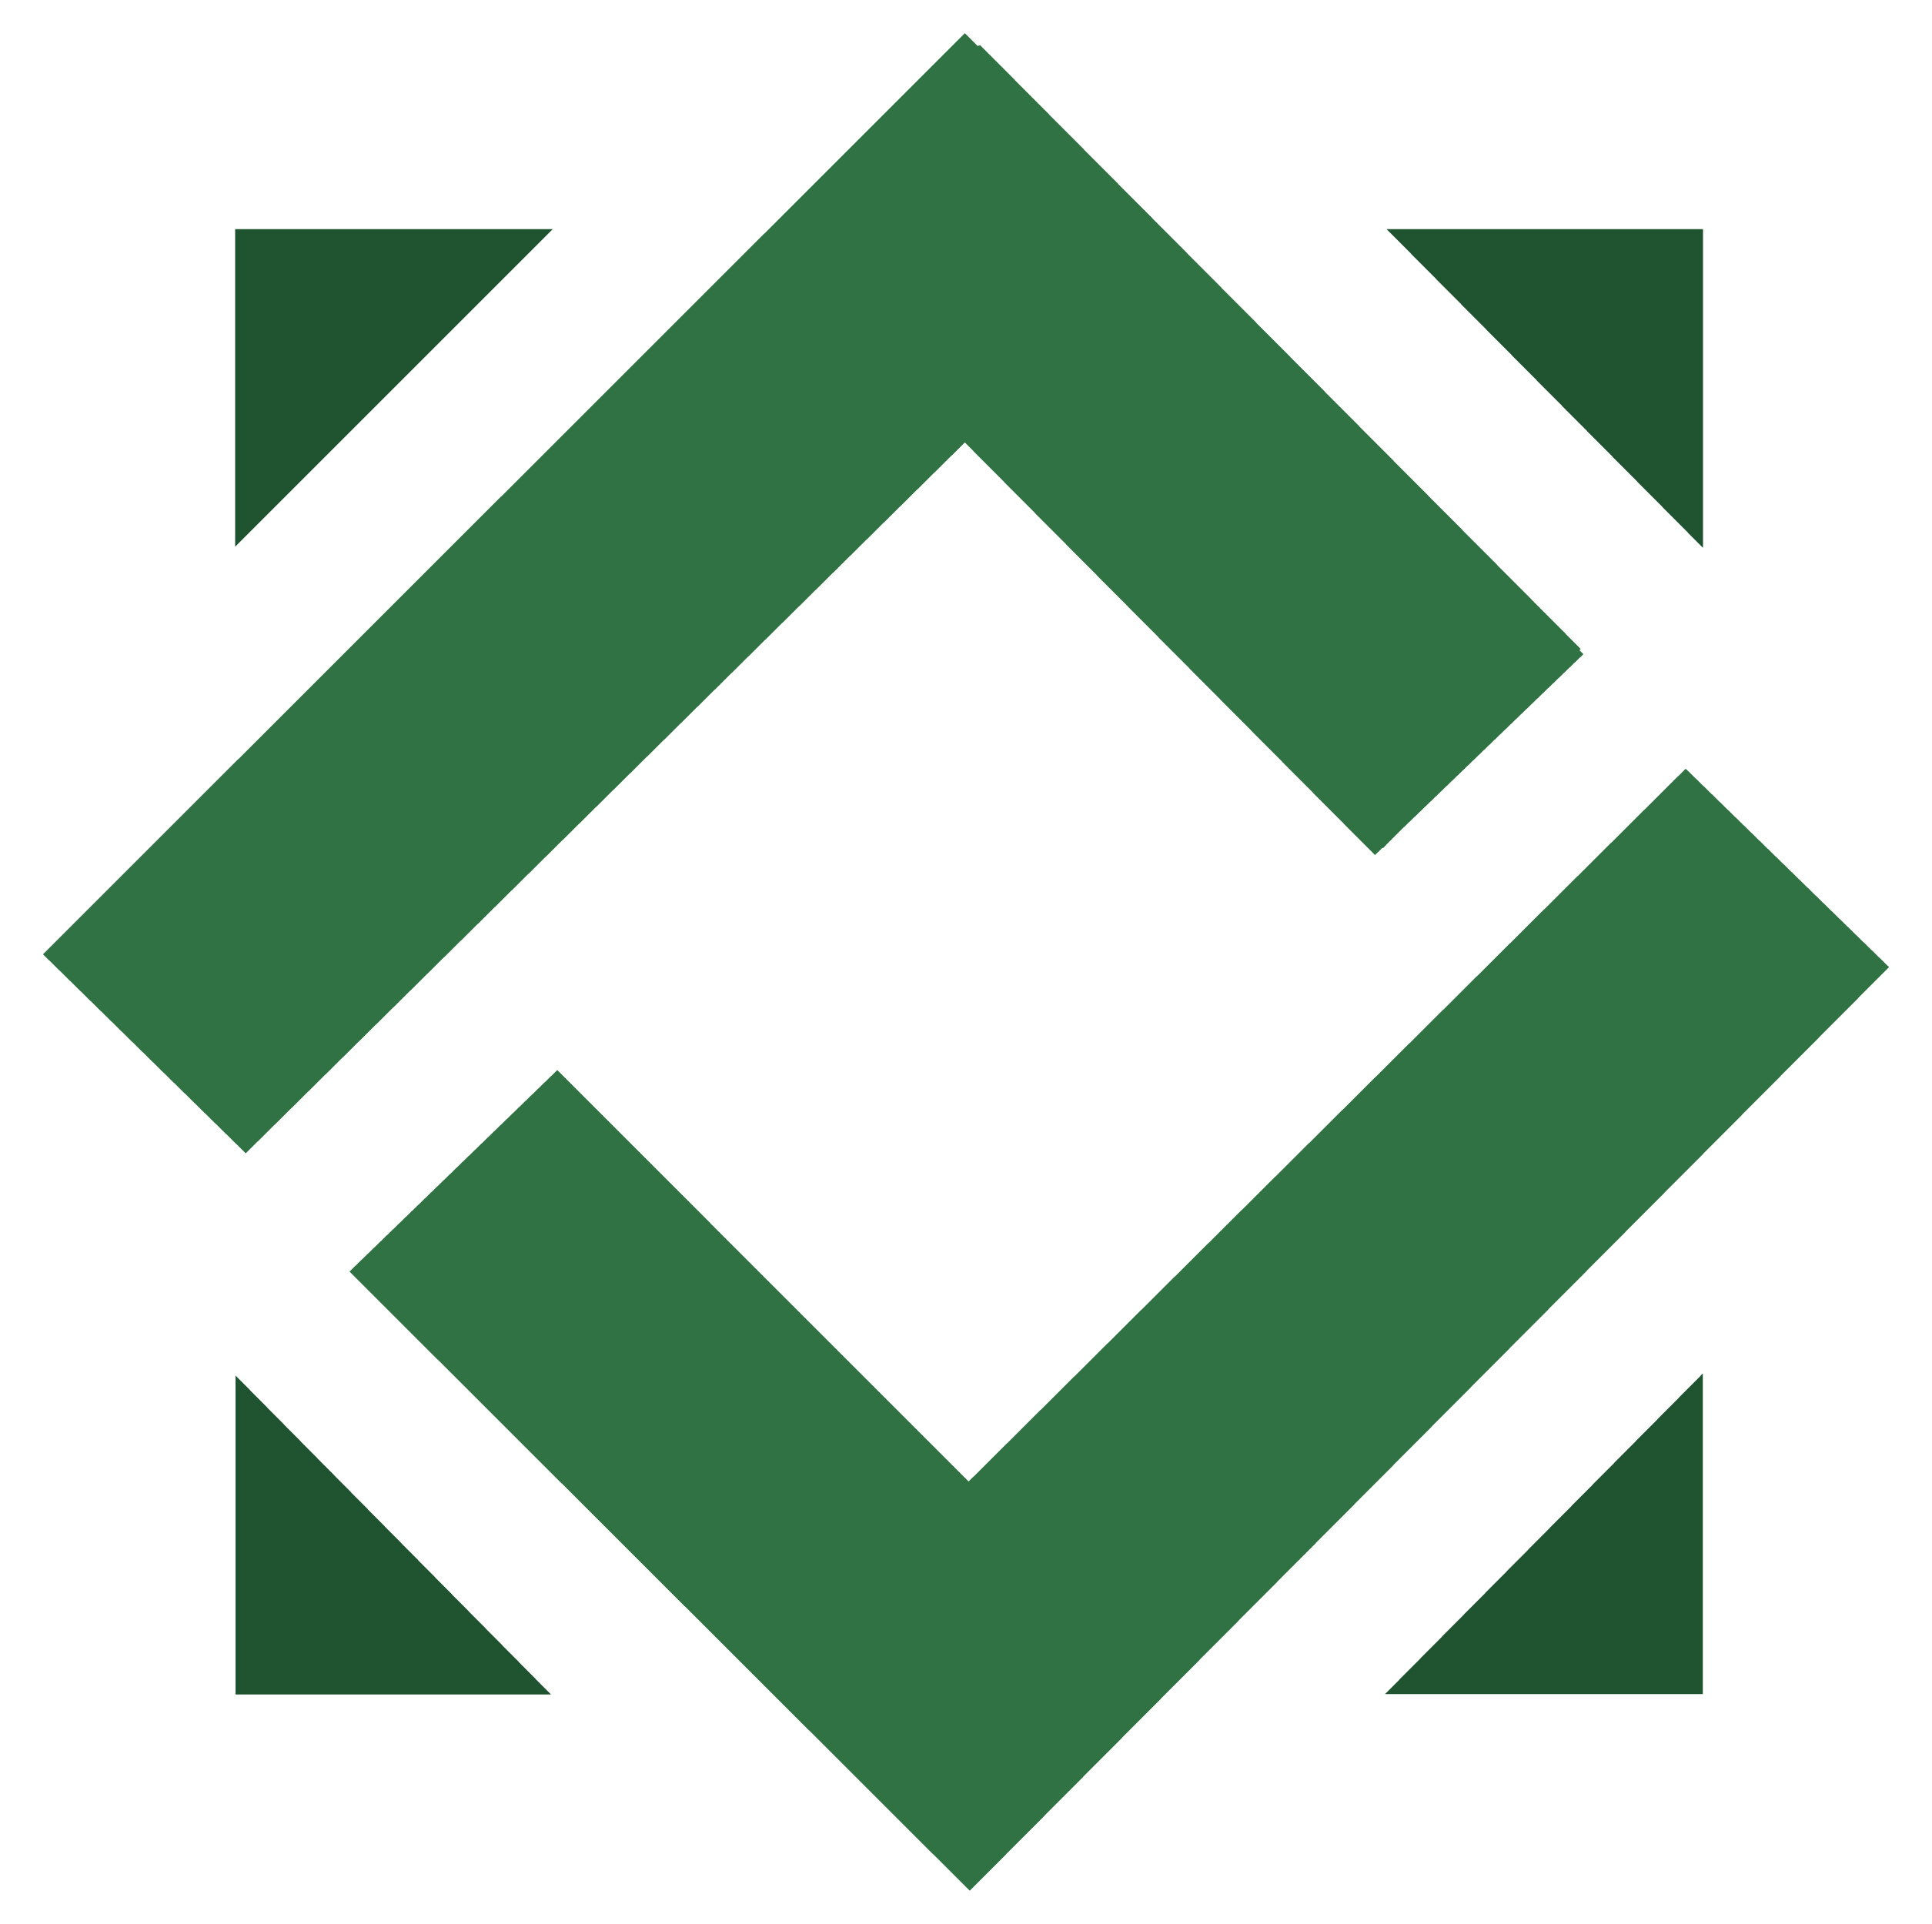 userexperience Consulting official logo - A green square with an inner rotated square placed on a white background https://www.userexperience-consulting.com